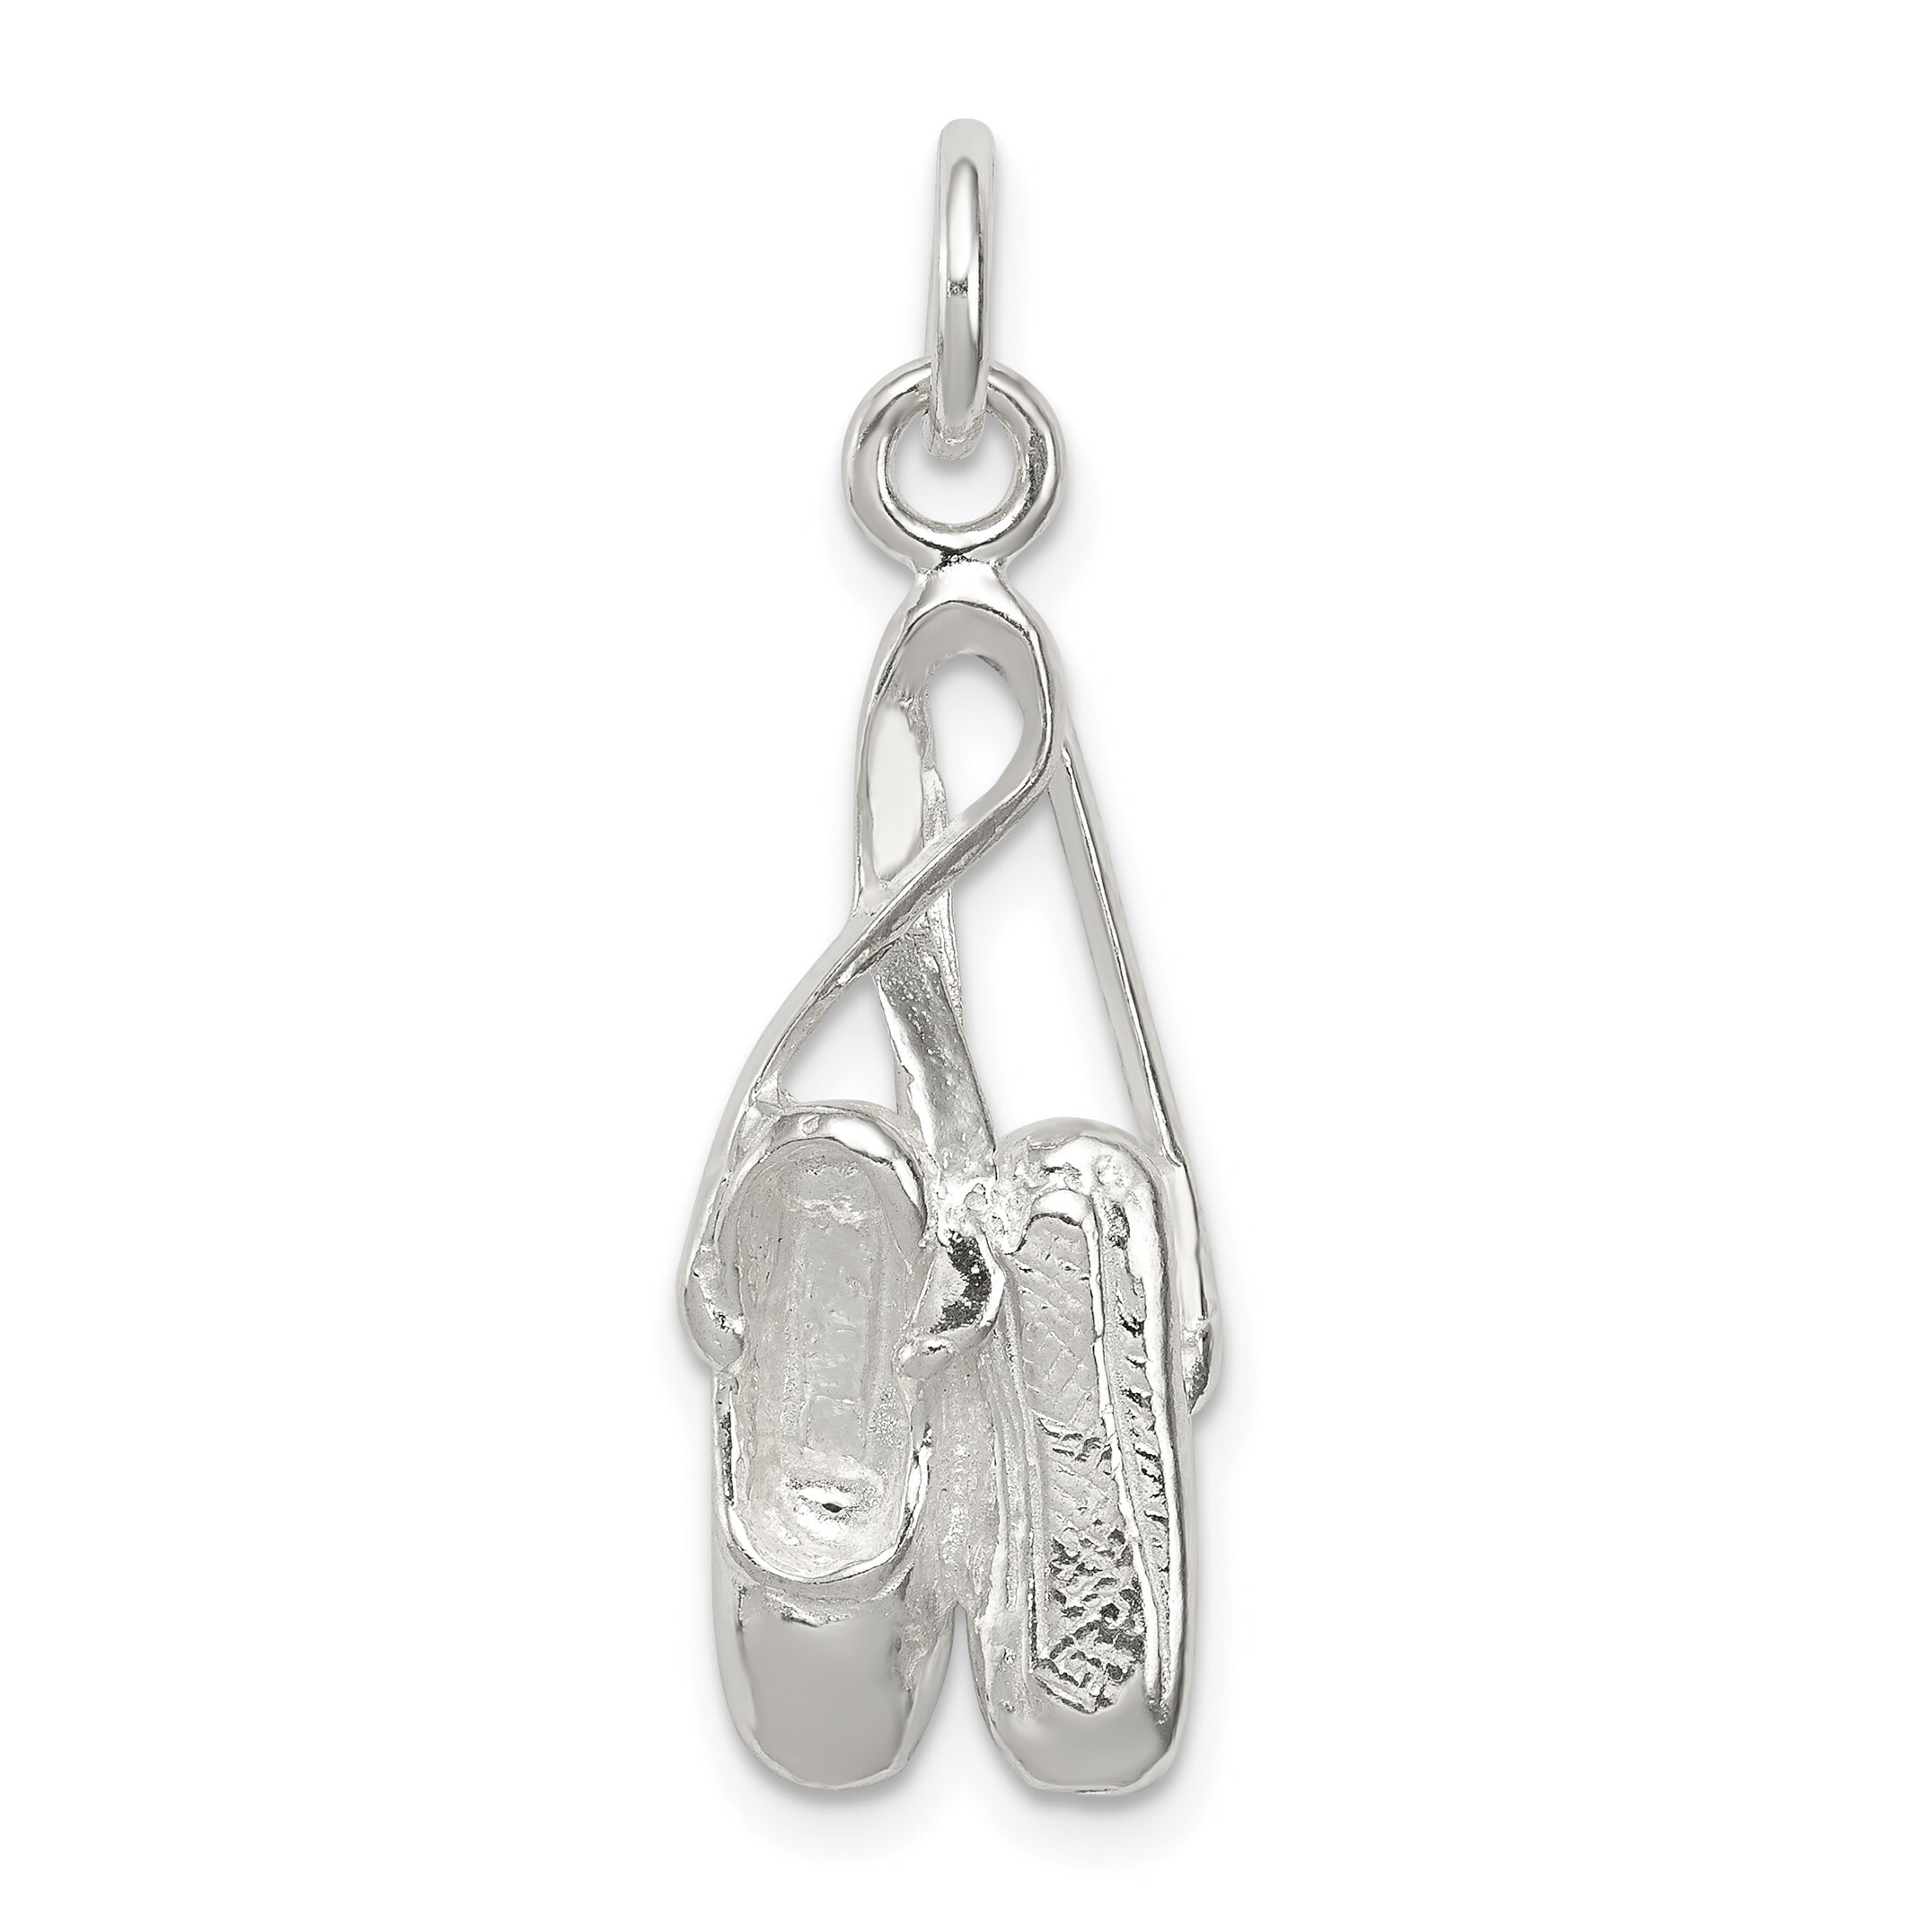 Findingking Sterling Silver Ballet Slippers Charm & 18" Chain